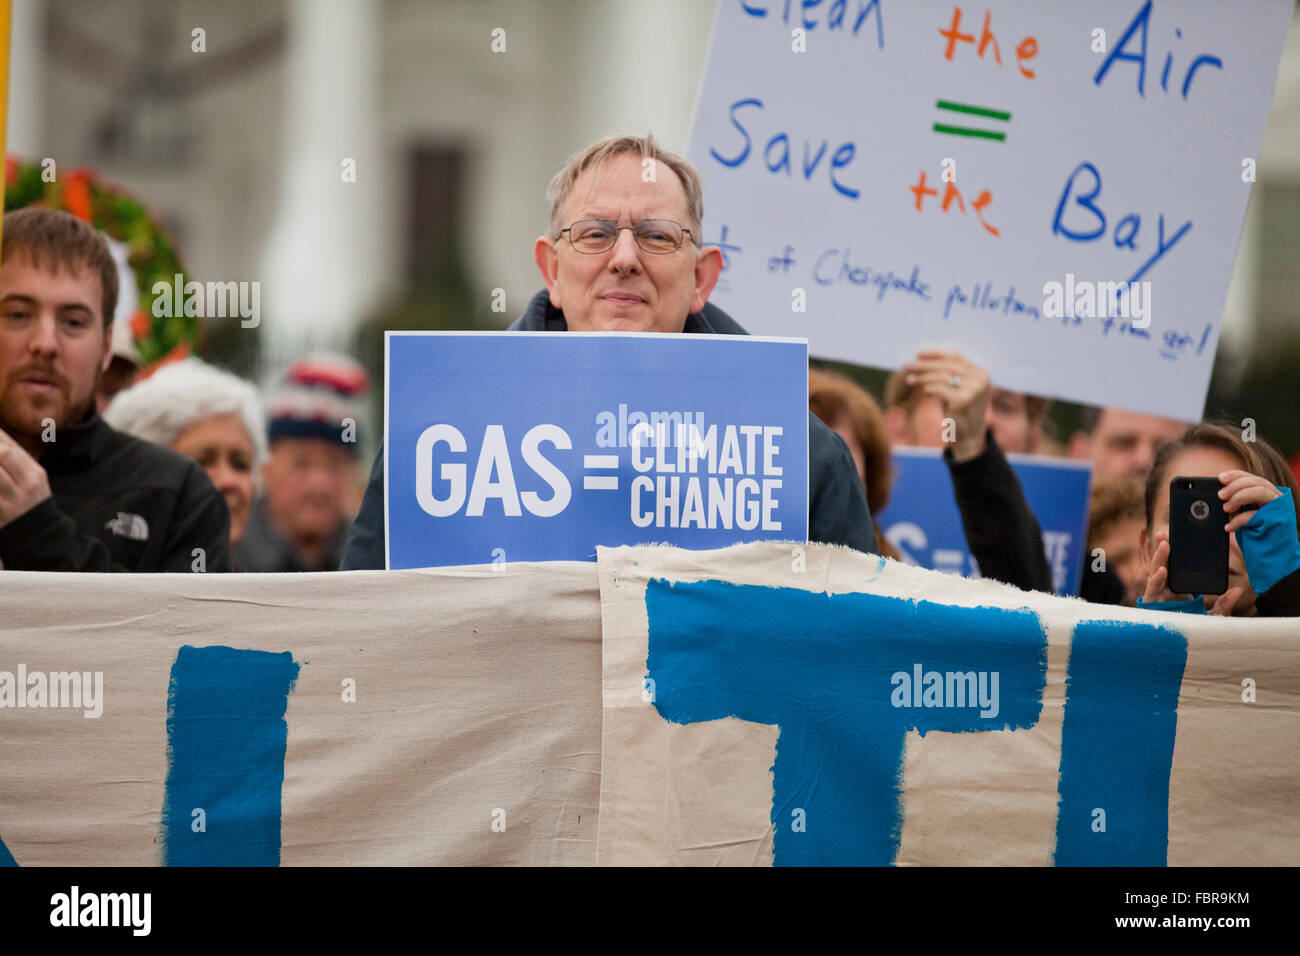 November 21, 2015, Washington, DC USA: Environmental activists protest in front of the White House (man holding 'Gas = Climate Change' sign) Stock Photo